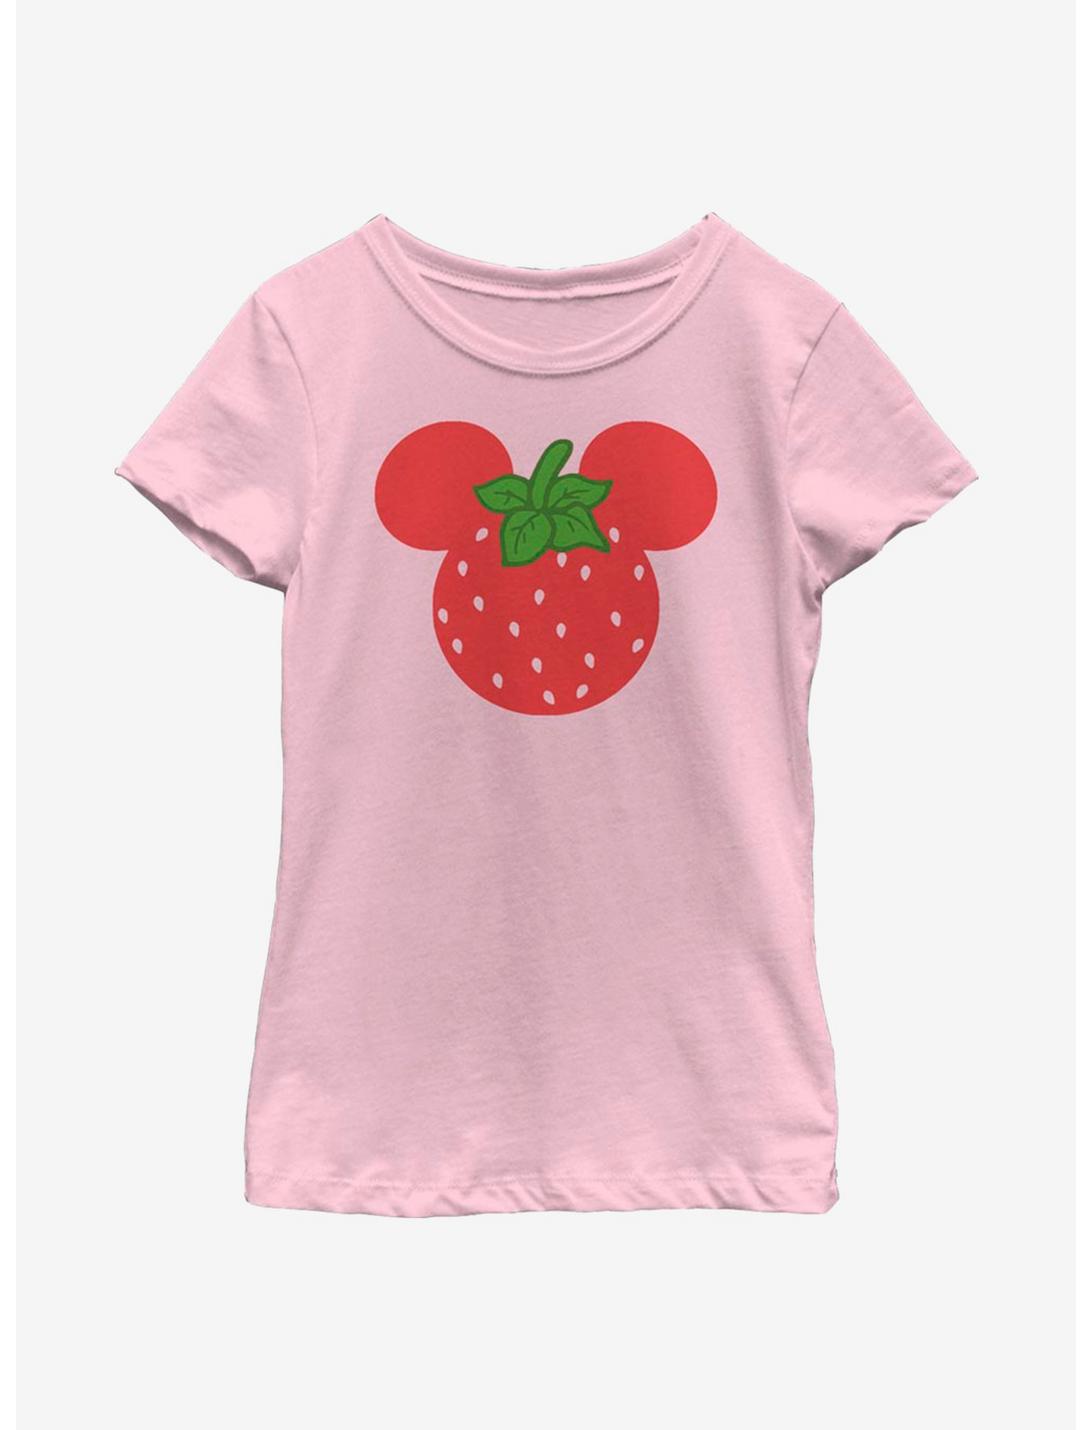 Disney Mickey Mouse Strawberry Ears Youth Girls T-Shirt, PINK, hi-res